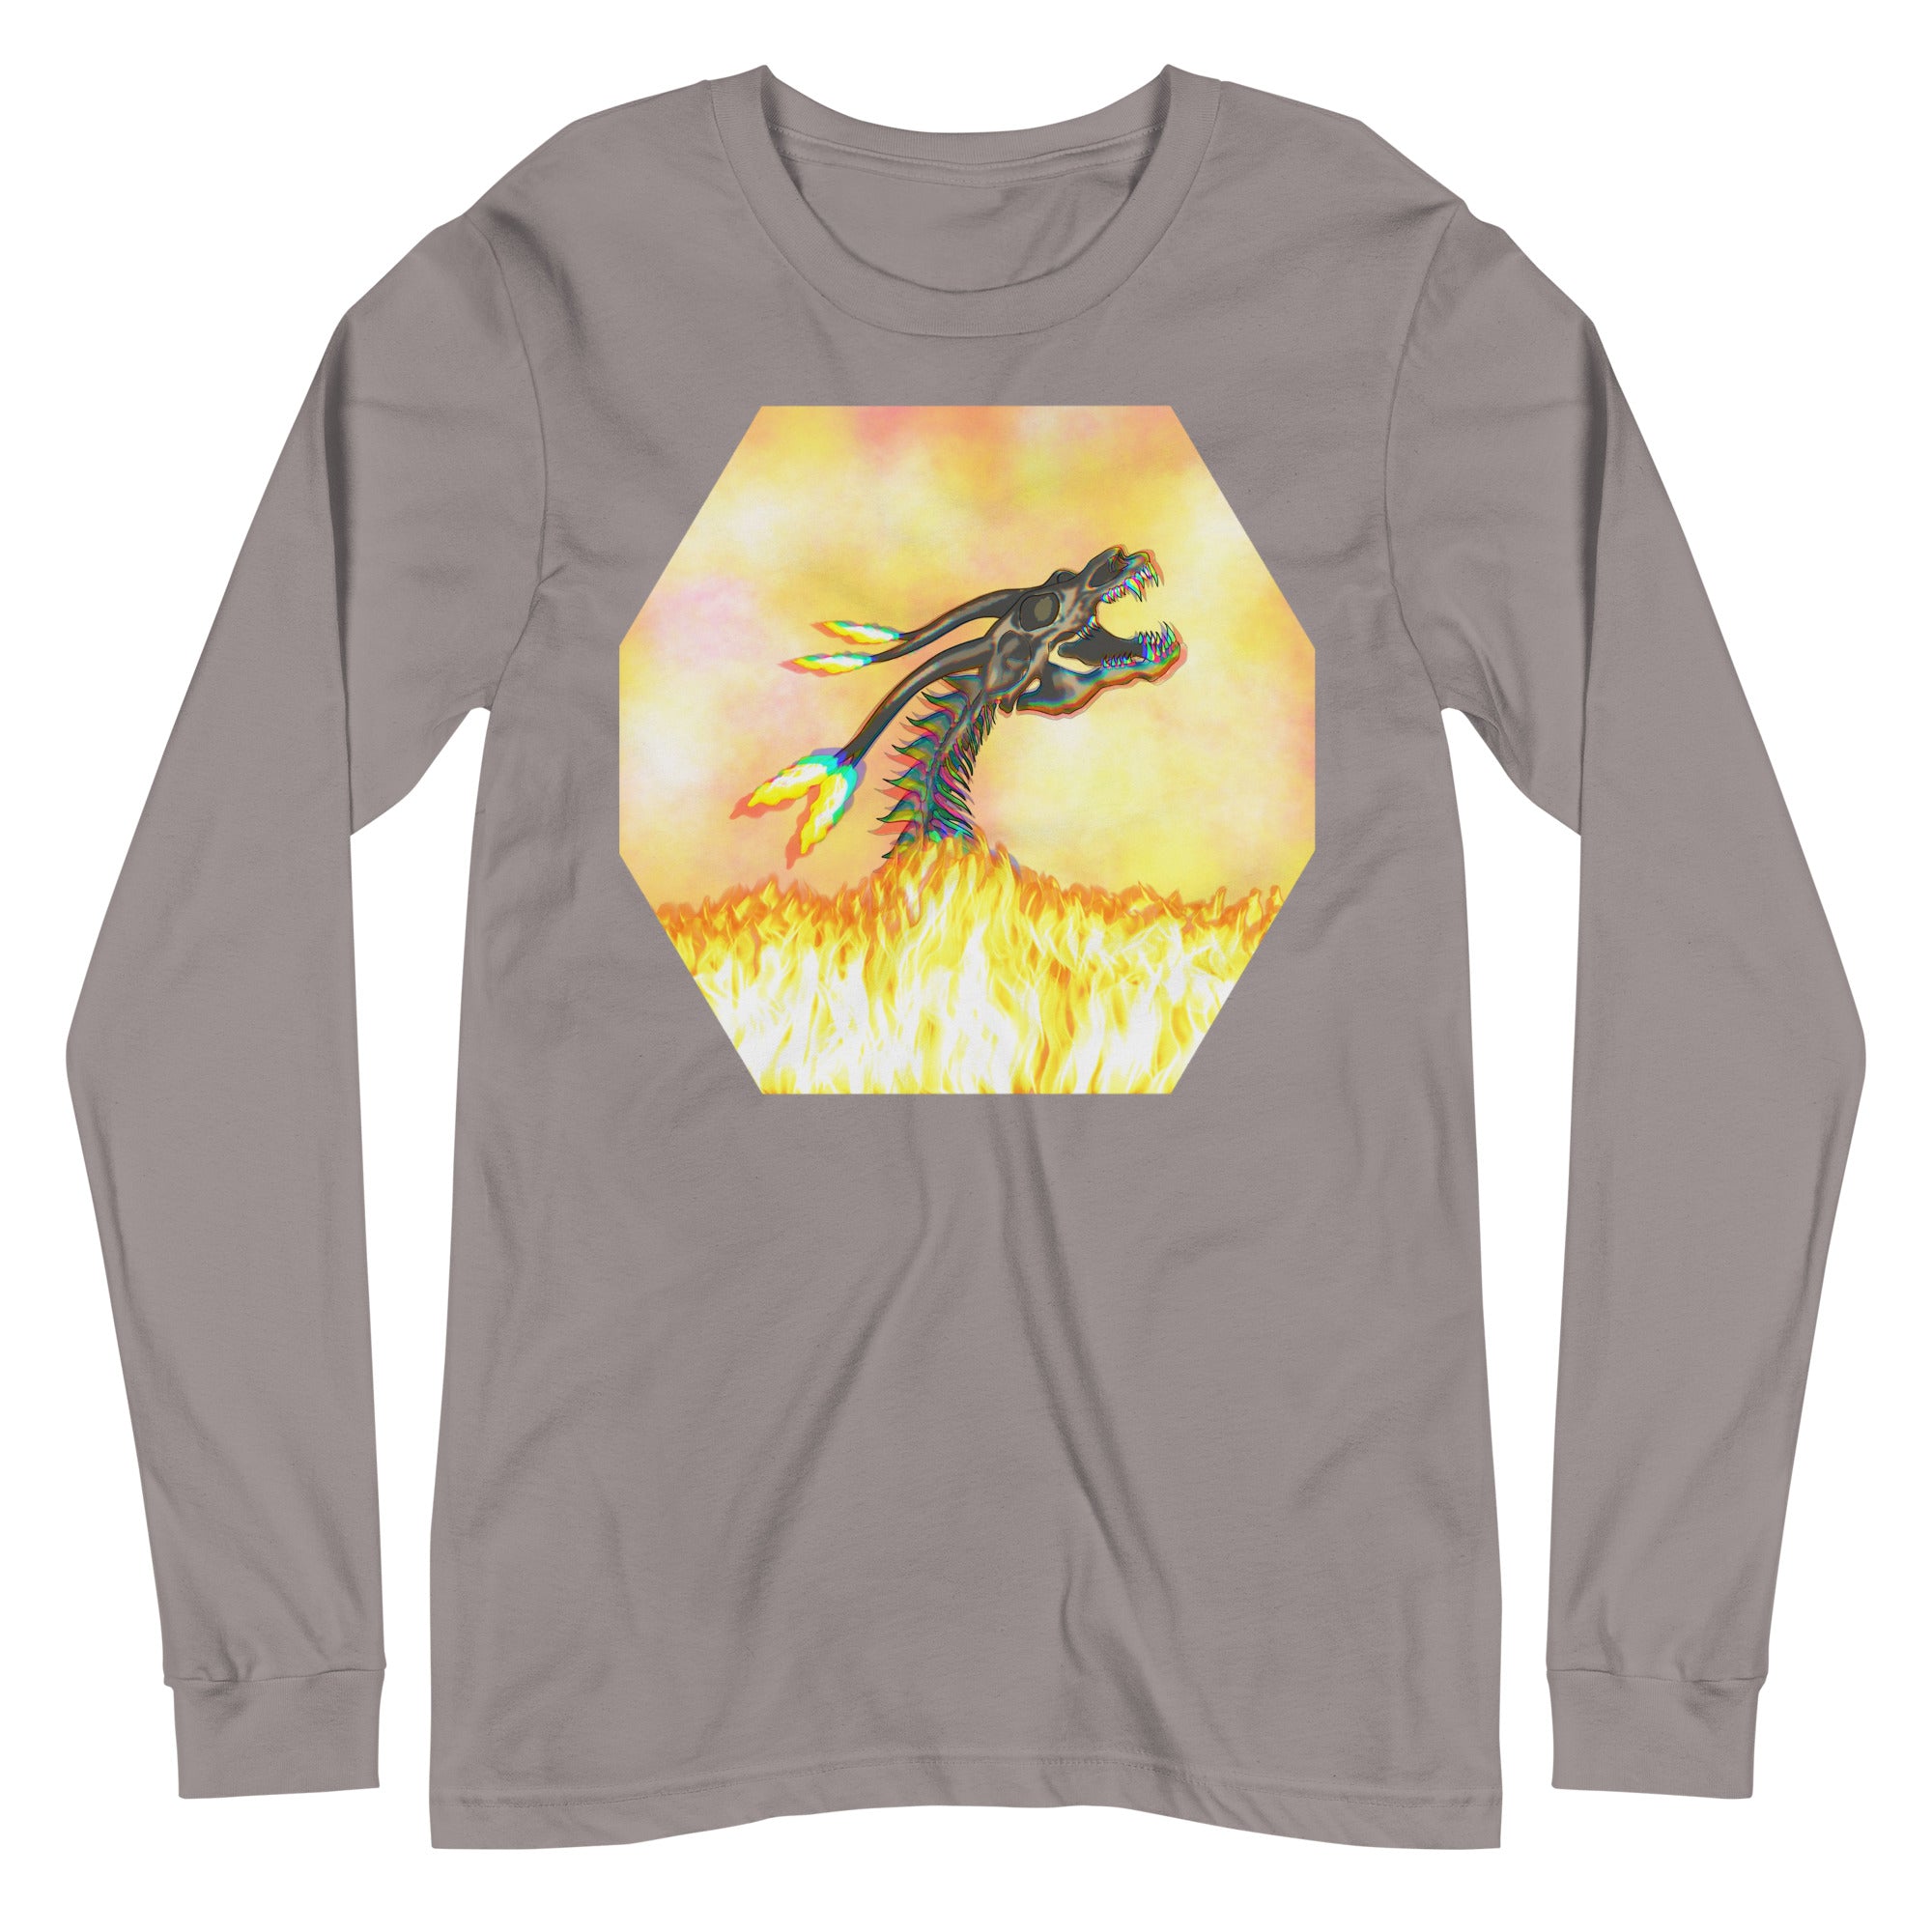 From The Flame- Unisex Long Sleeve Tee